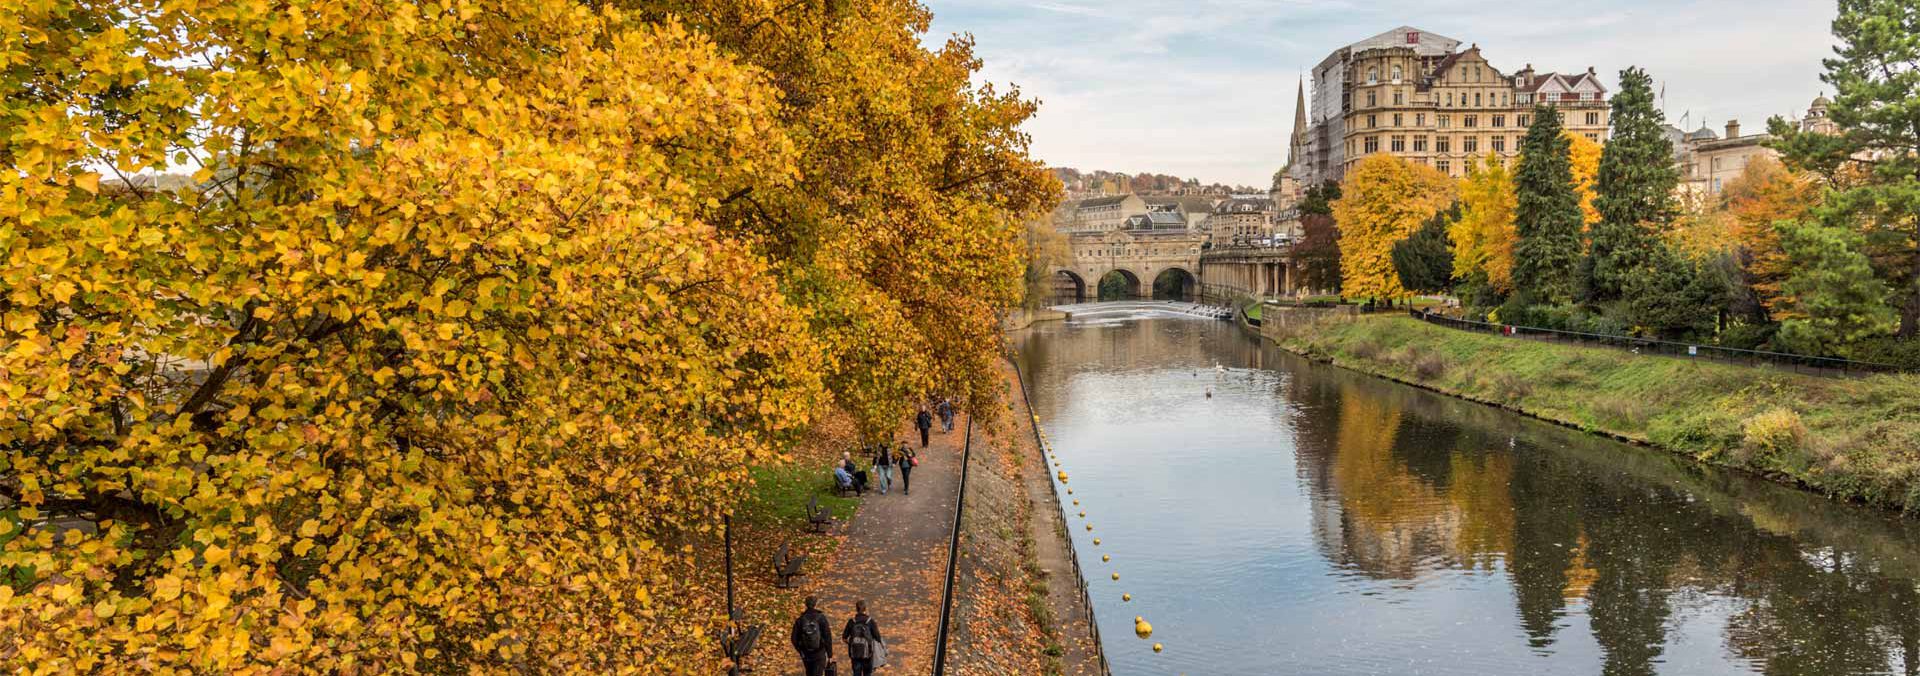 Property to Rent in Bath